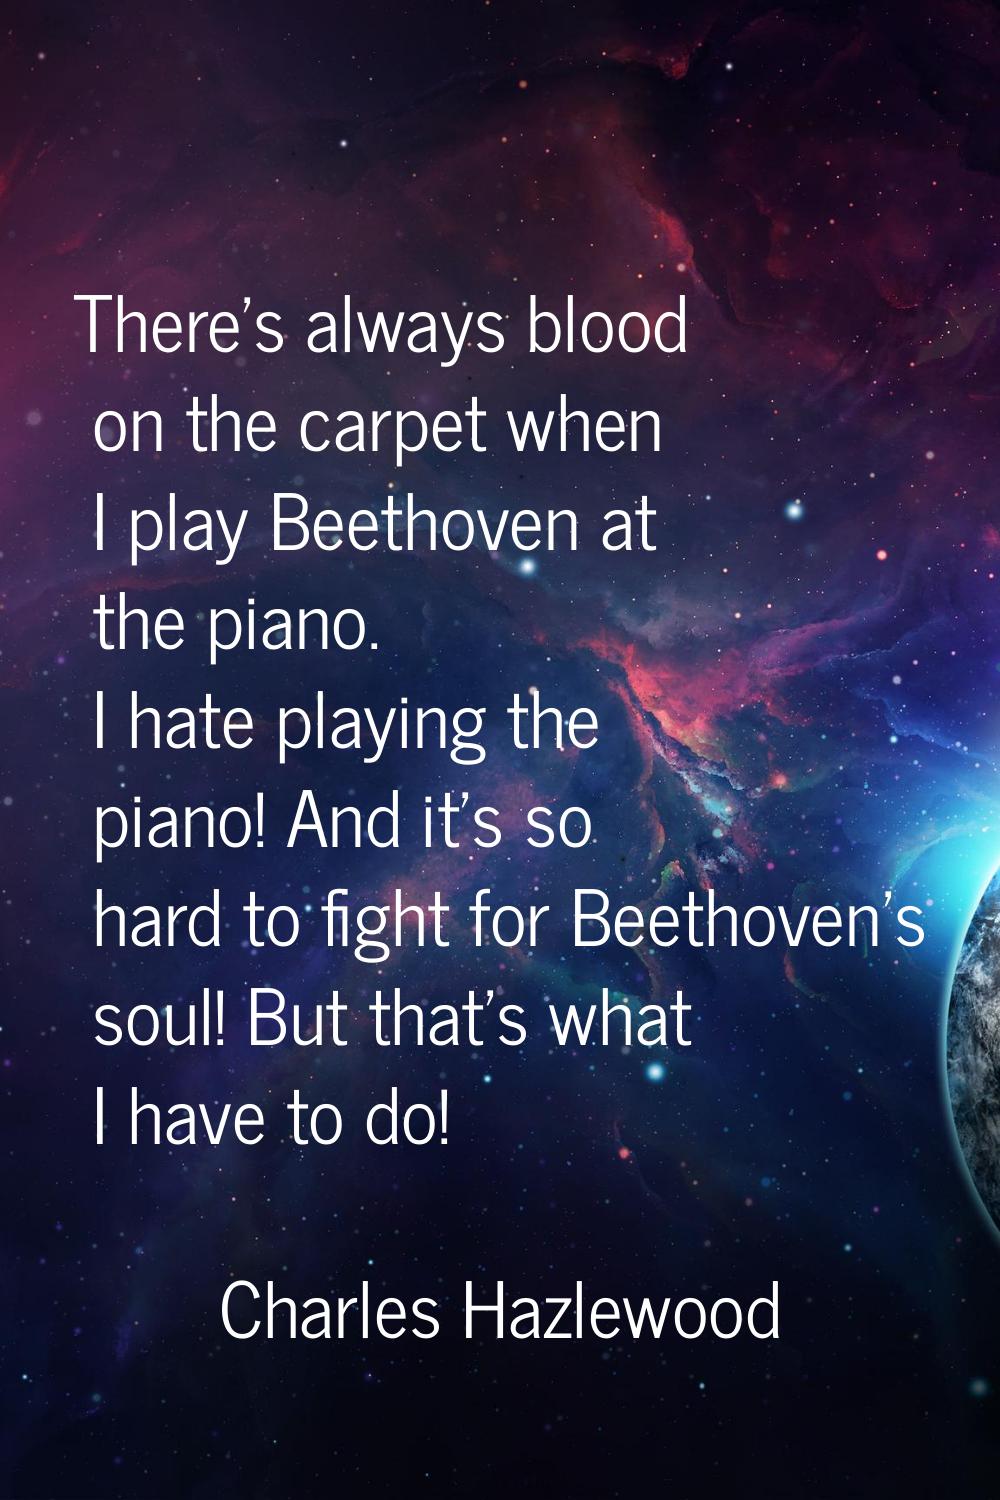 There's always blood on the carpet when I play Beethoven at the piano. I hate playing the piano! An